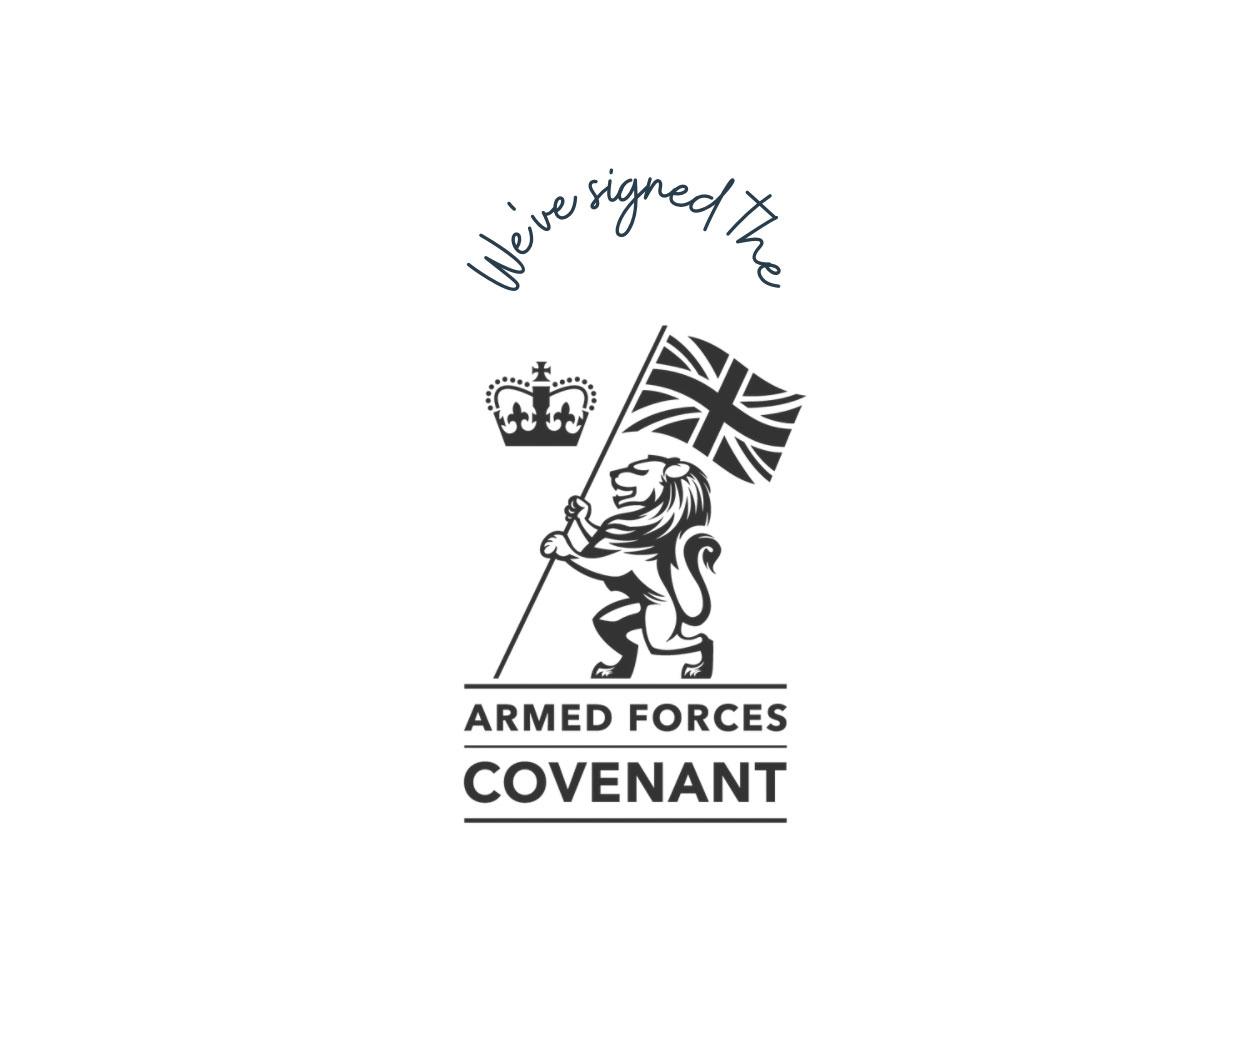 Yates’s Jetting Ltd signs the Armed Forces Covenant